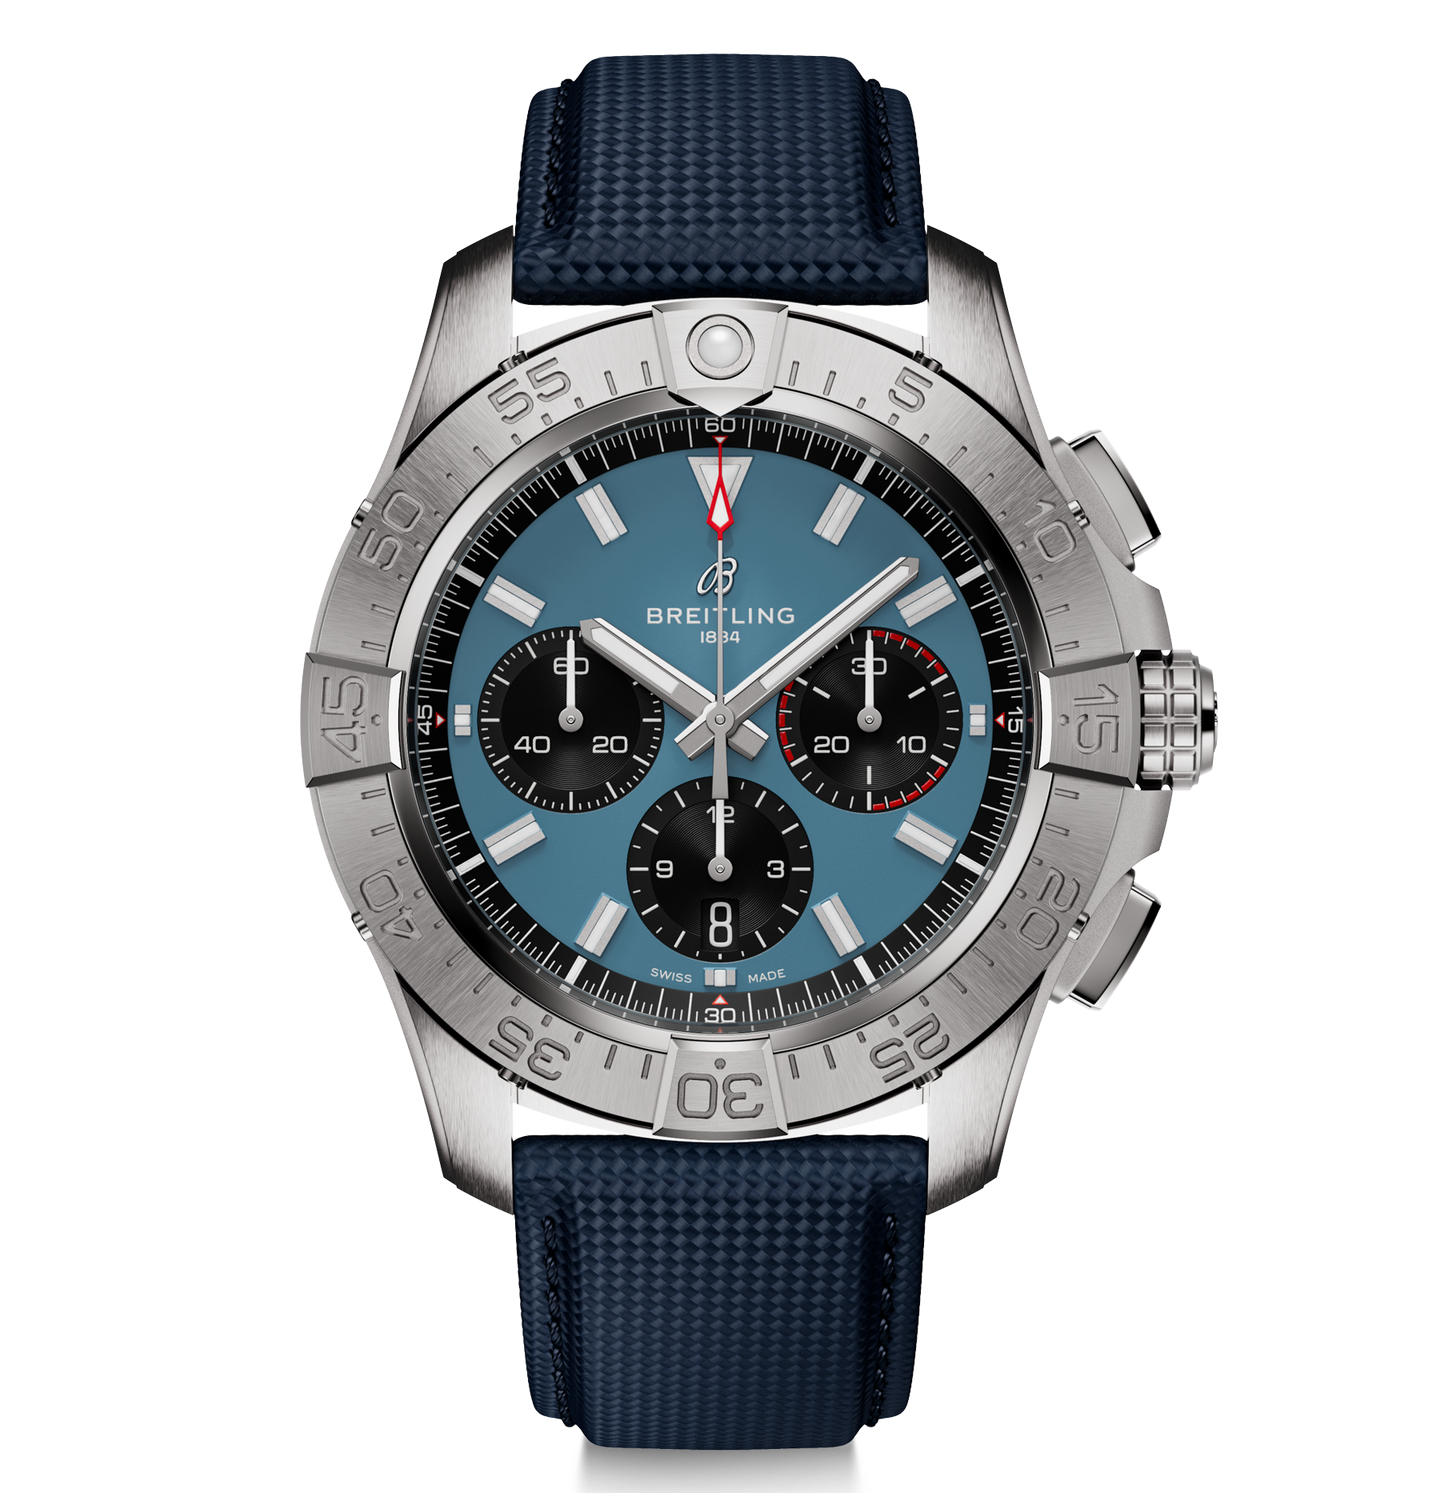 Breitling Avenger B01 Chronograph 44mm Watch with Blue Strap